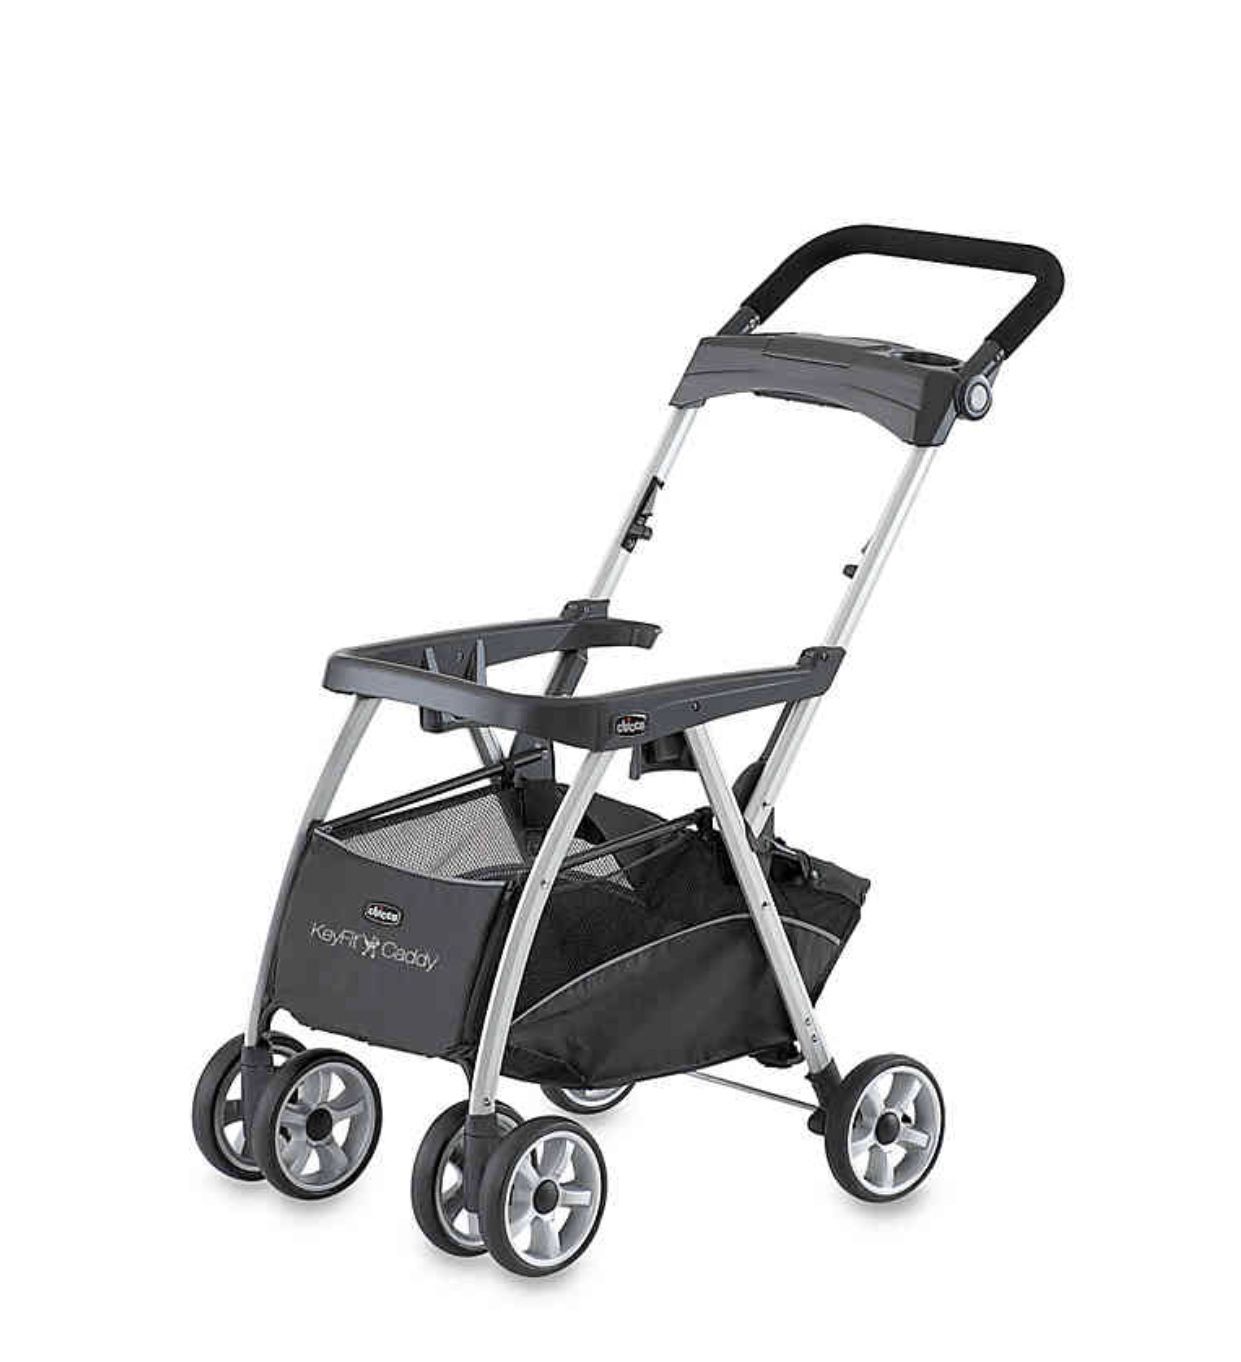 Chicco keyfit caddy light weight stroller